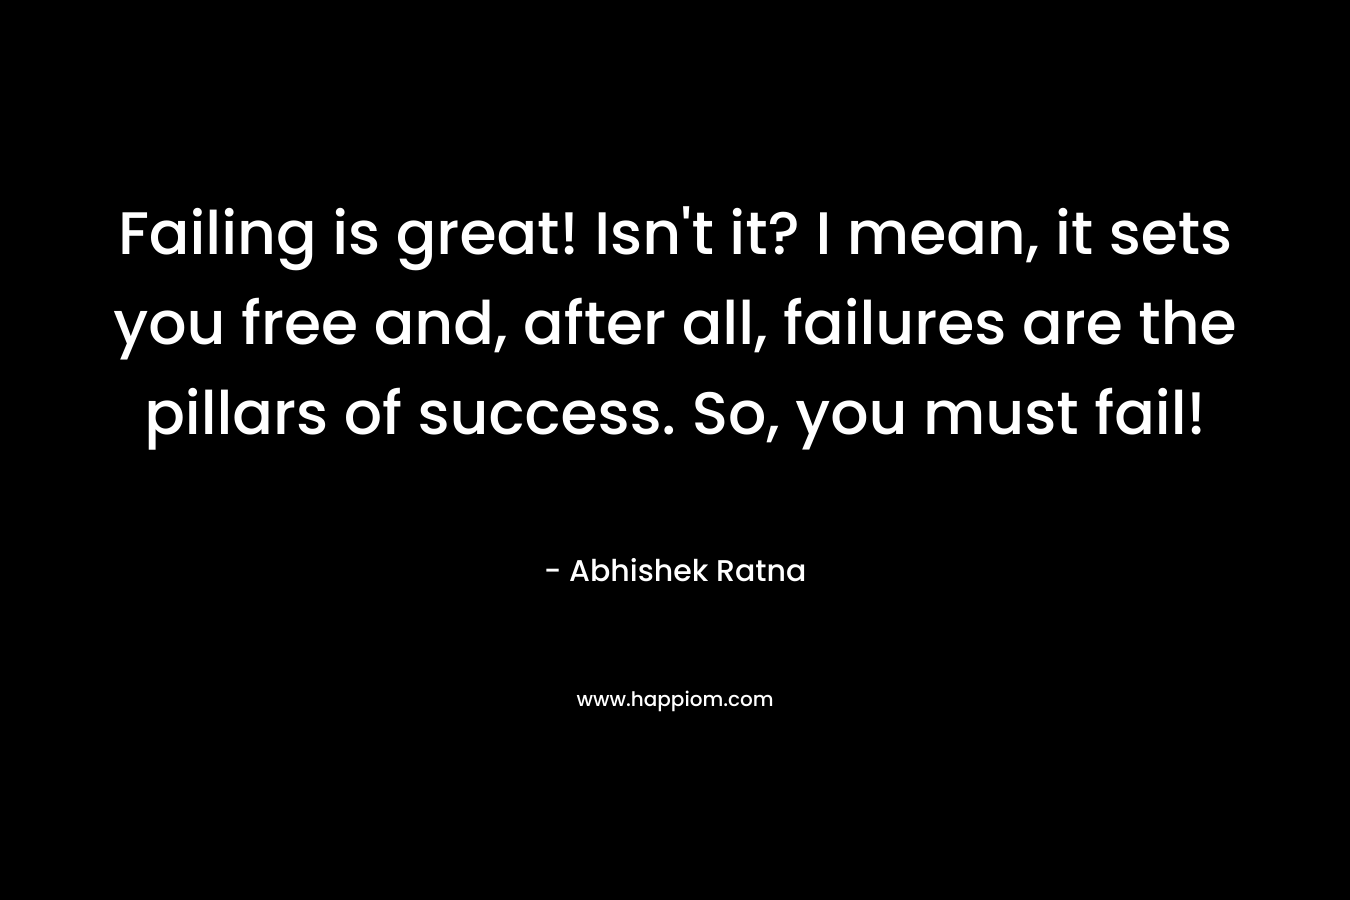 Failing is great! Isn’t it? I mean, it sets you free and, after all, failures are the pillars of success. So, you must fail! – Abhishek Ratna